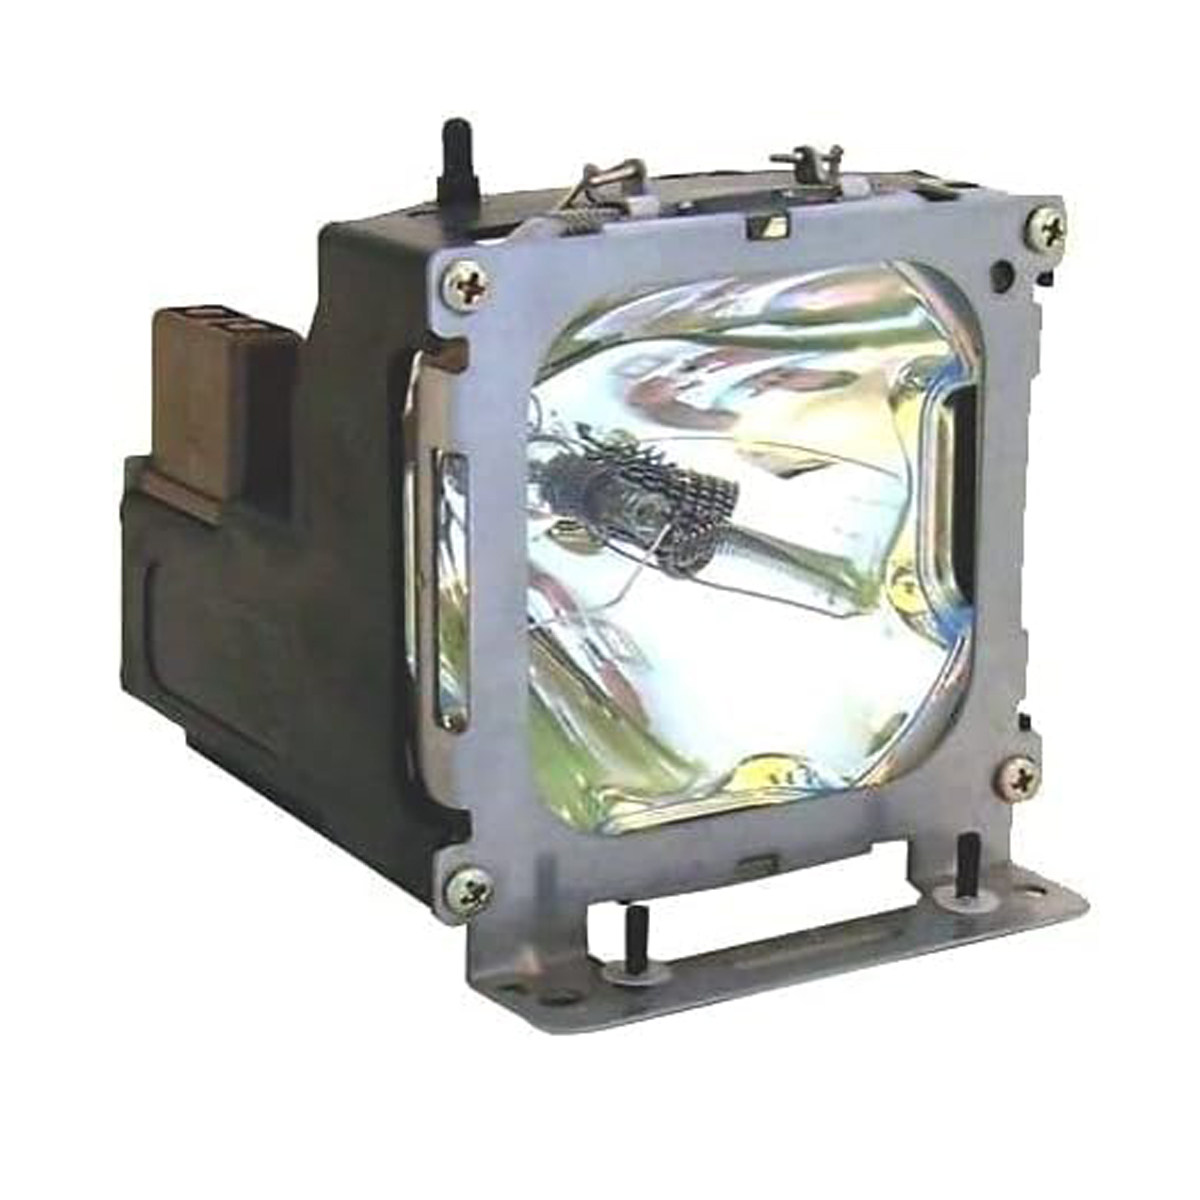 Replacement Projector lamp LAMP-030 For PROXIMA DP6860